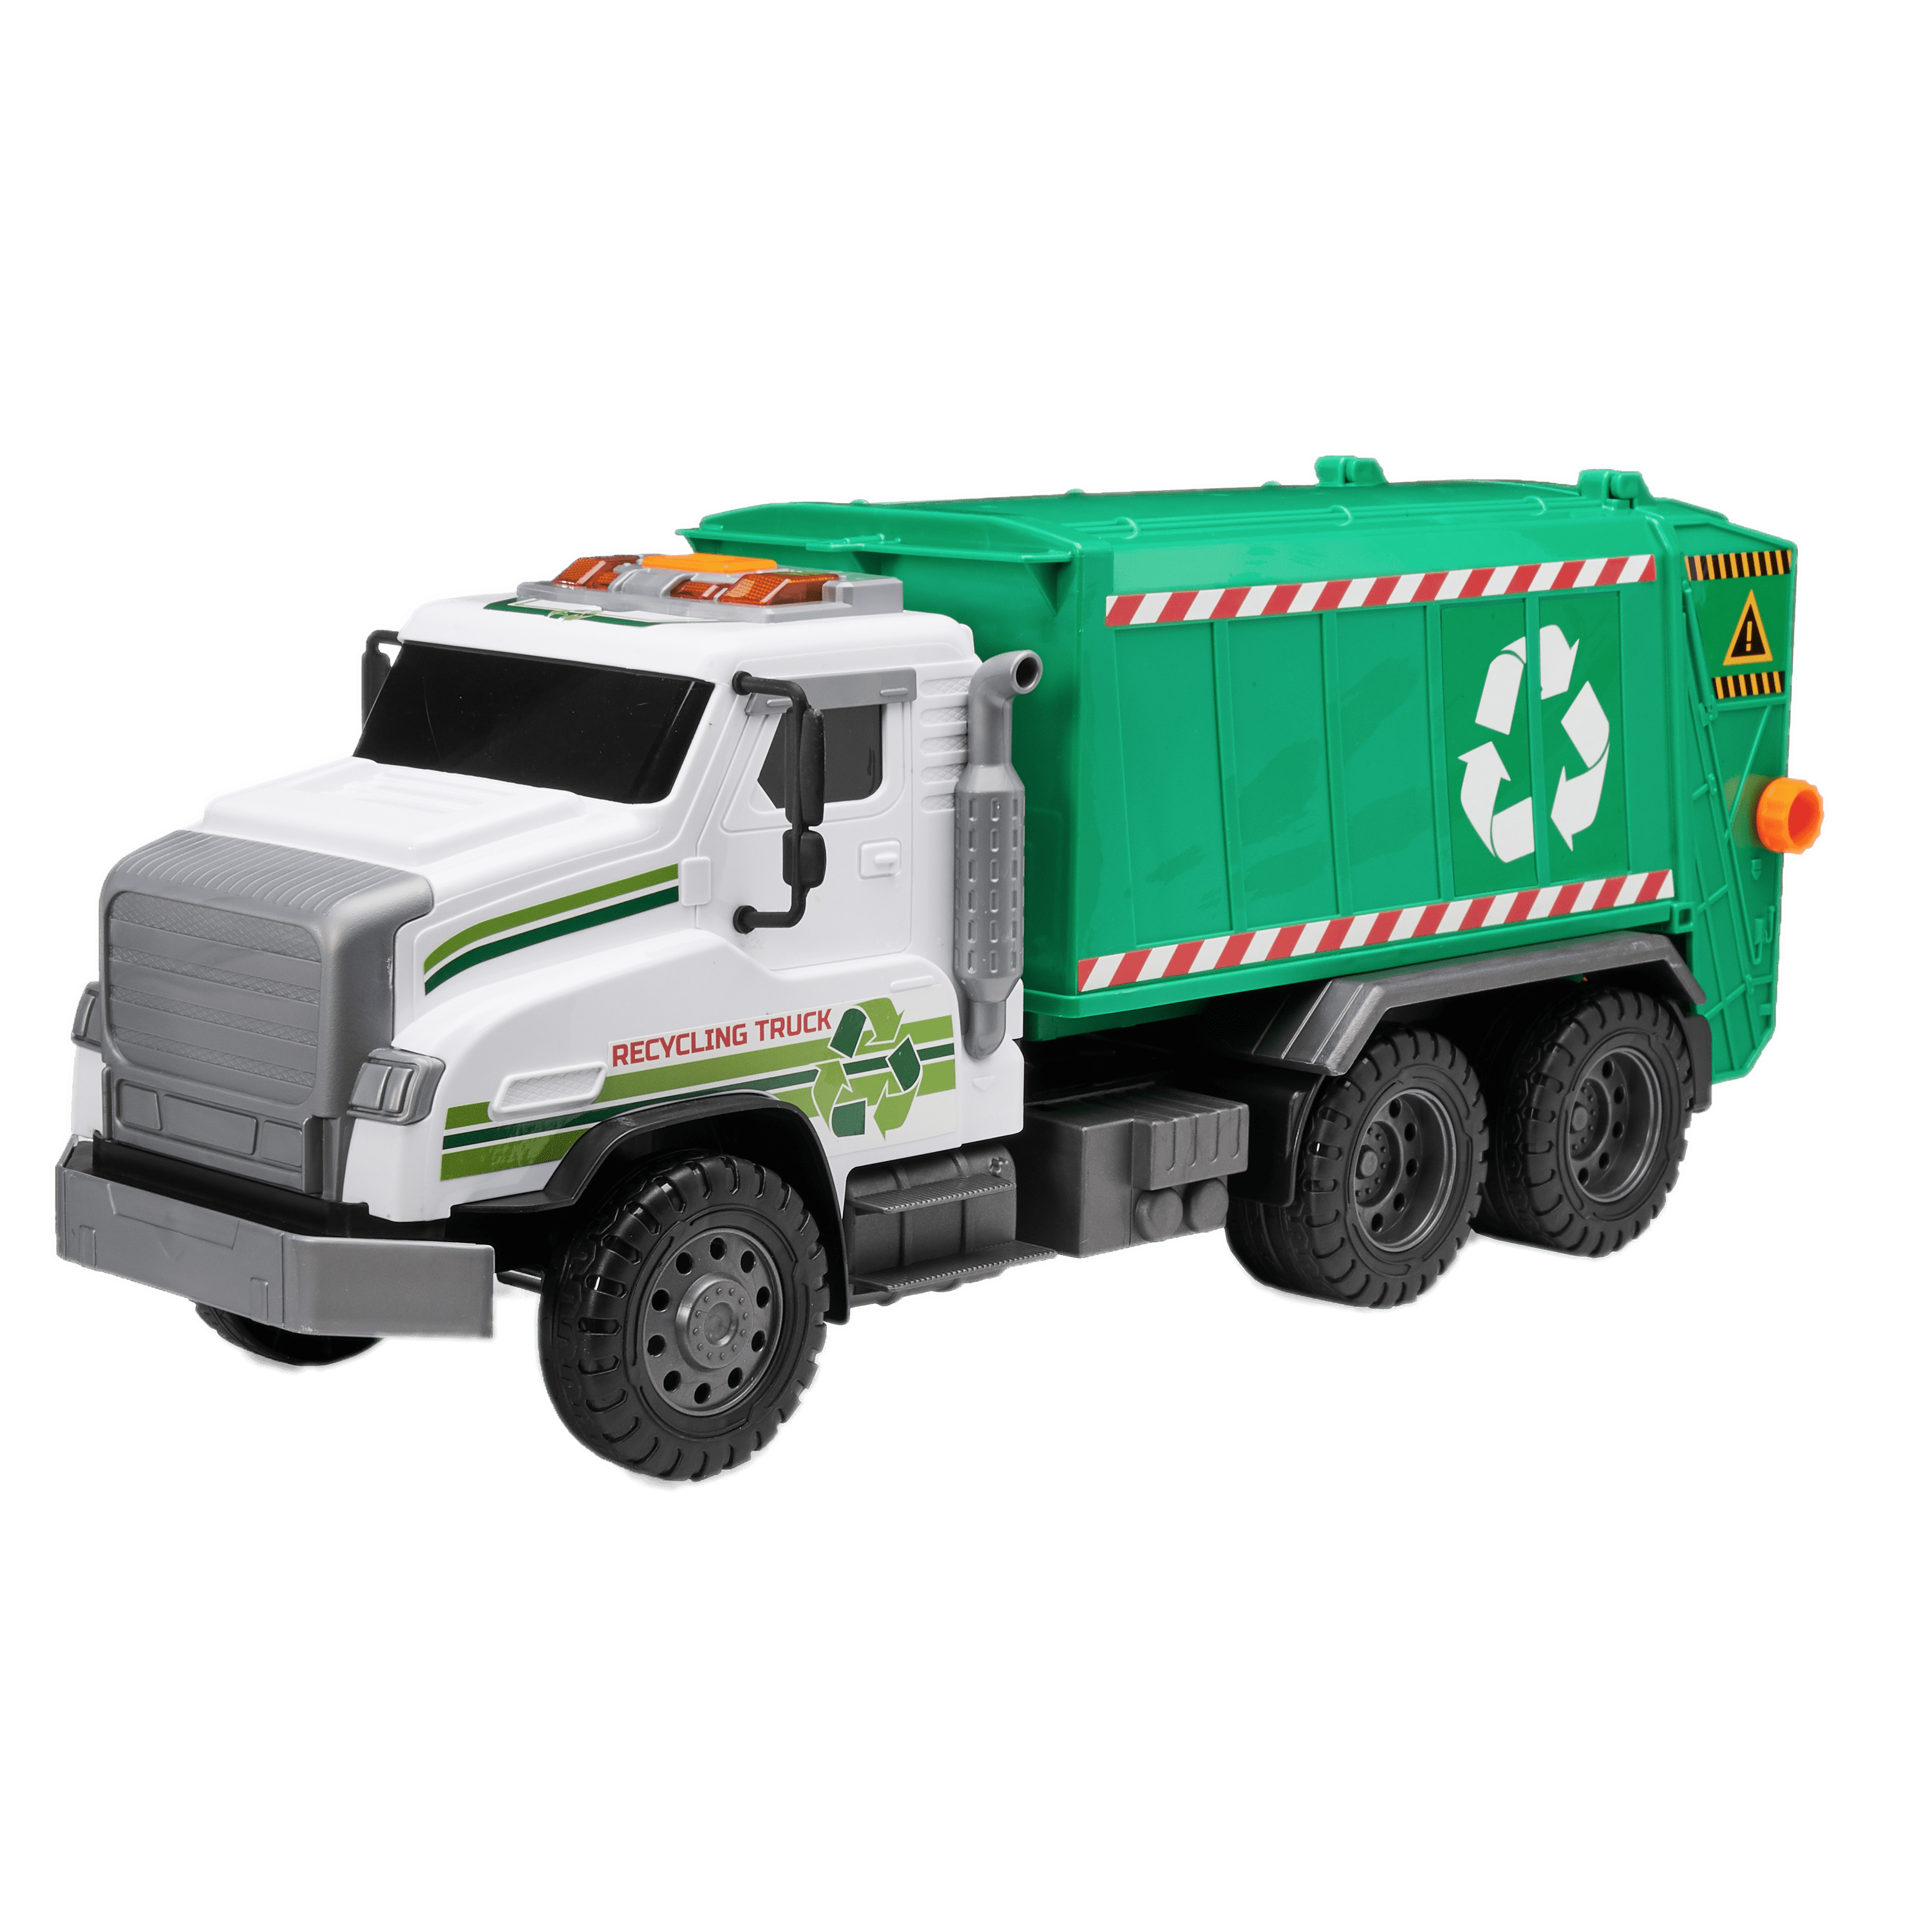 Toy Recycling Truck SVG Clip arts